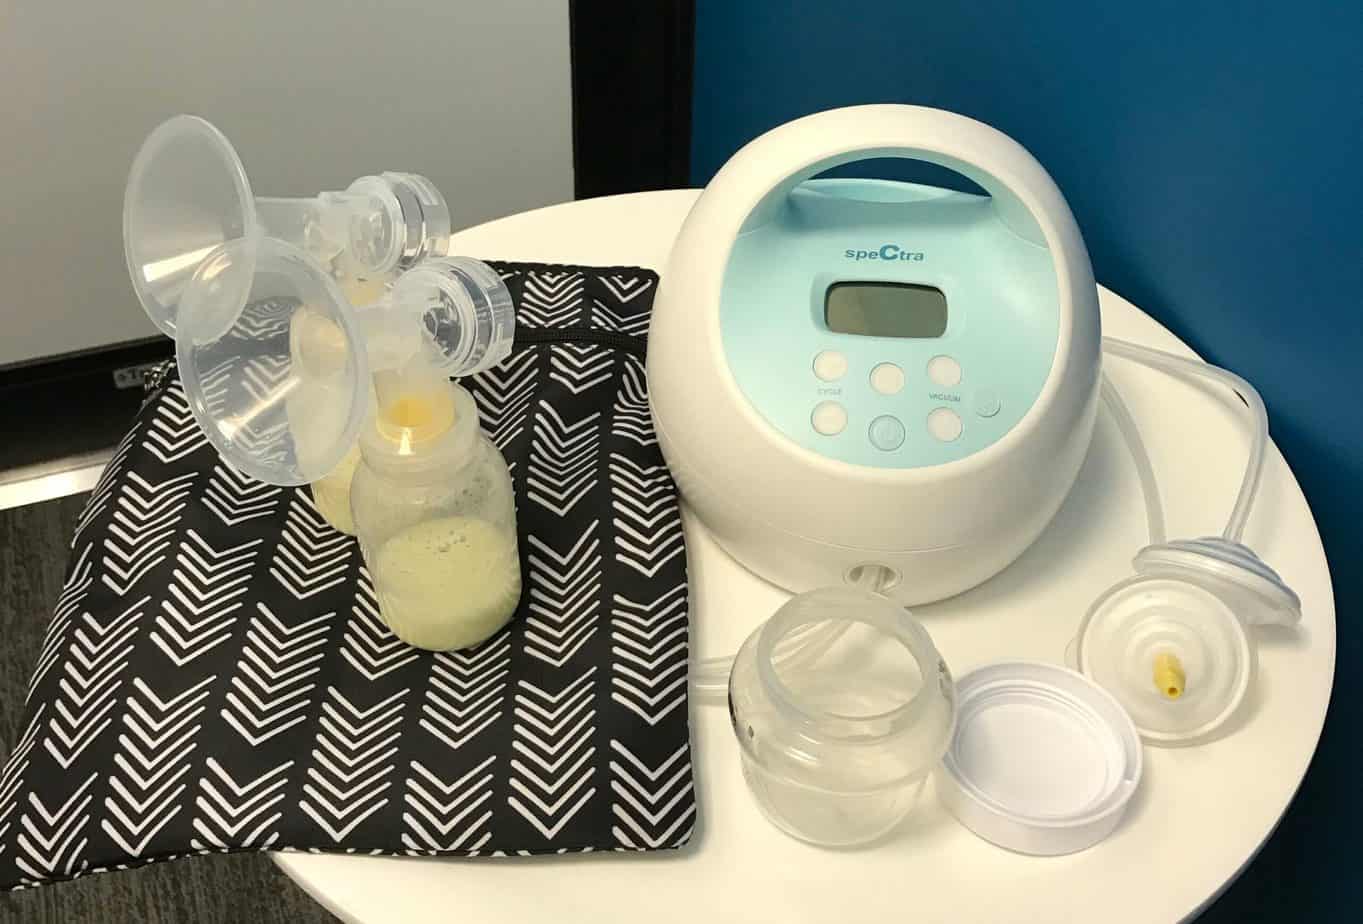 spectra s1 breast pump review